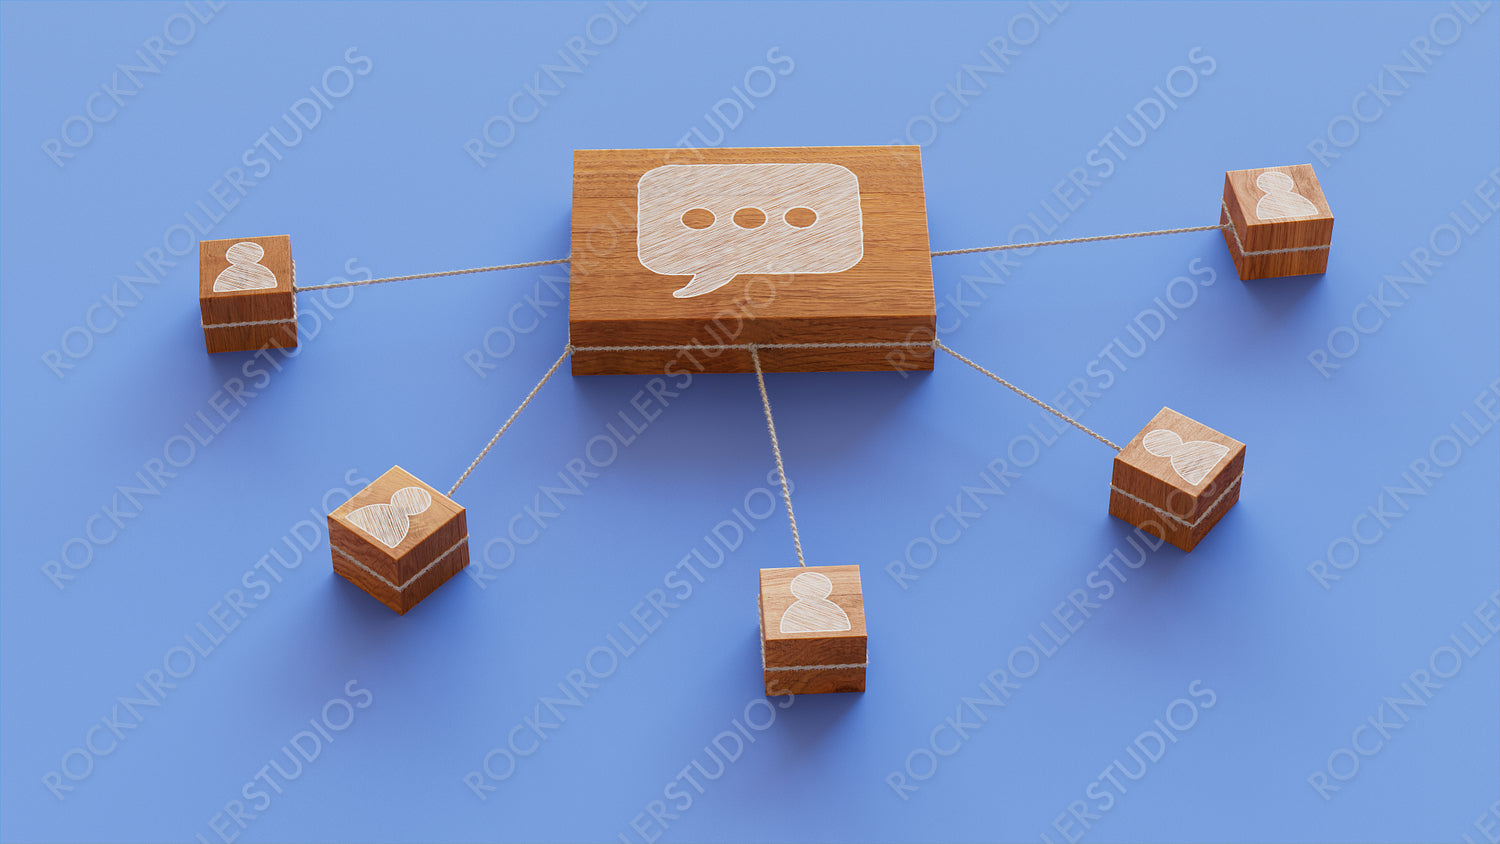 Text Technology Concept with sms Symbol on a Wooden Block. User Network Connections are Represented with White string. Blue background. 3D Render.